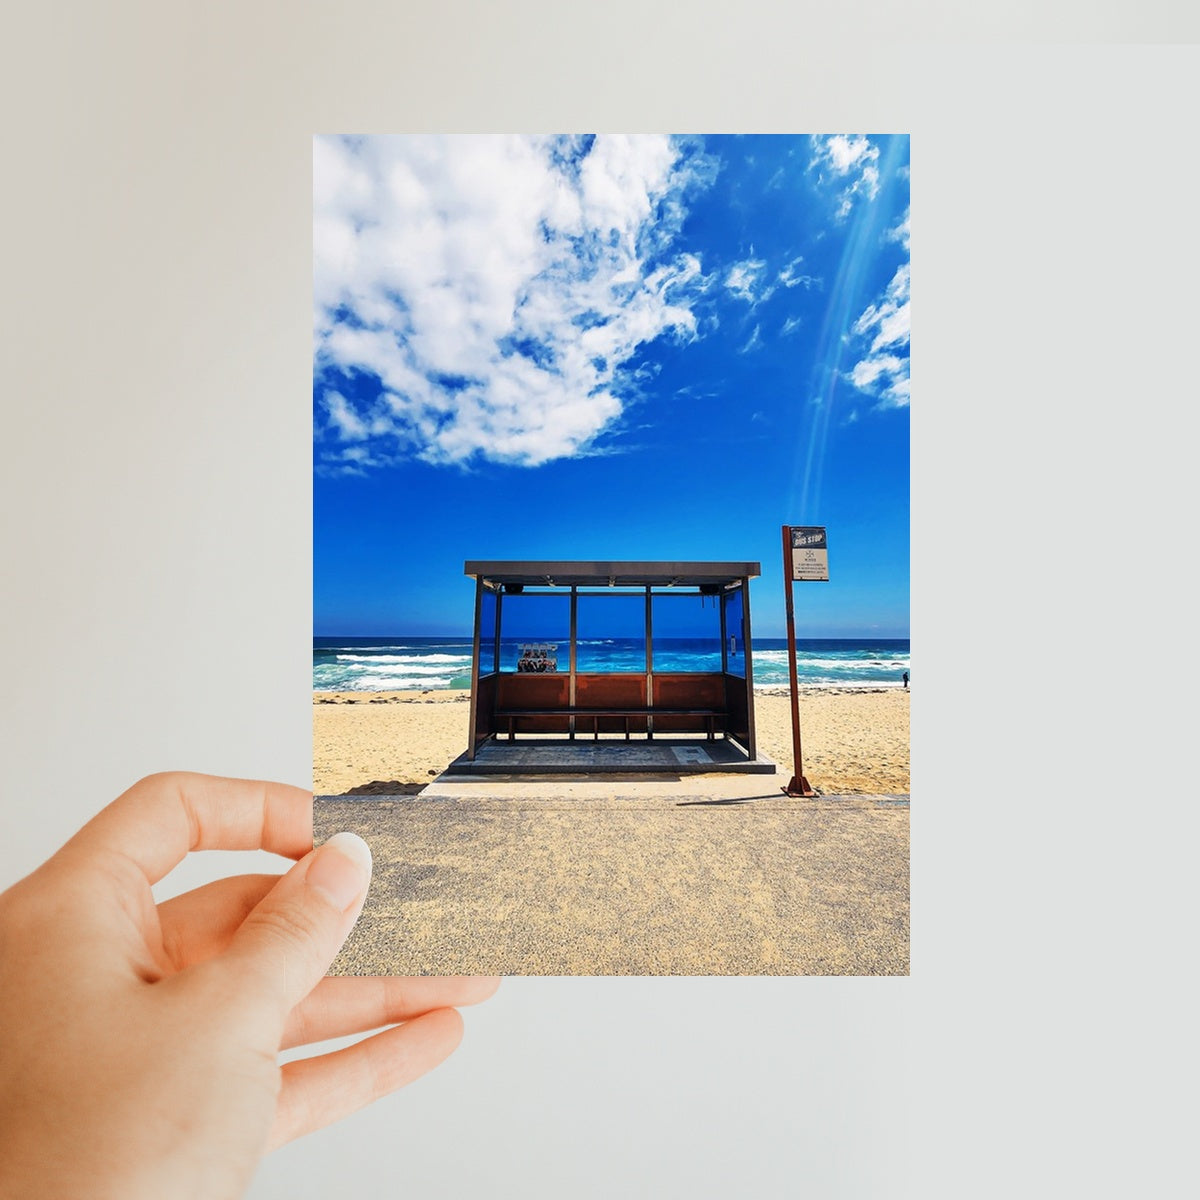 BTS spring day location place bus stop on the beach Classic Postcard